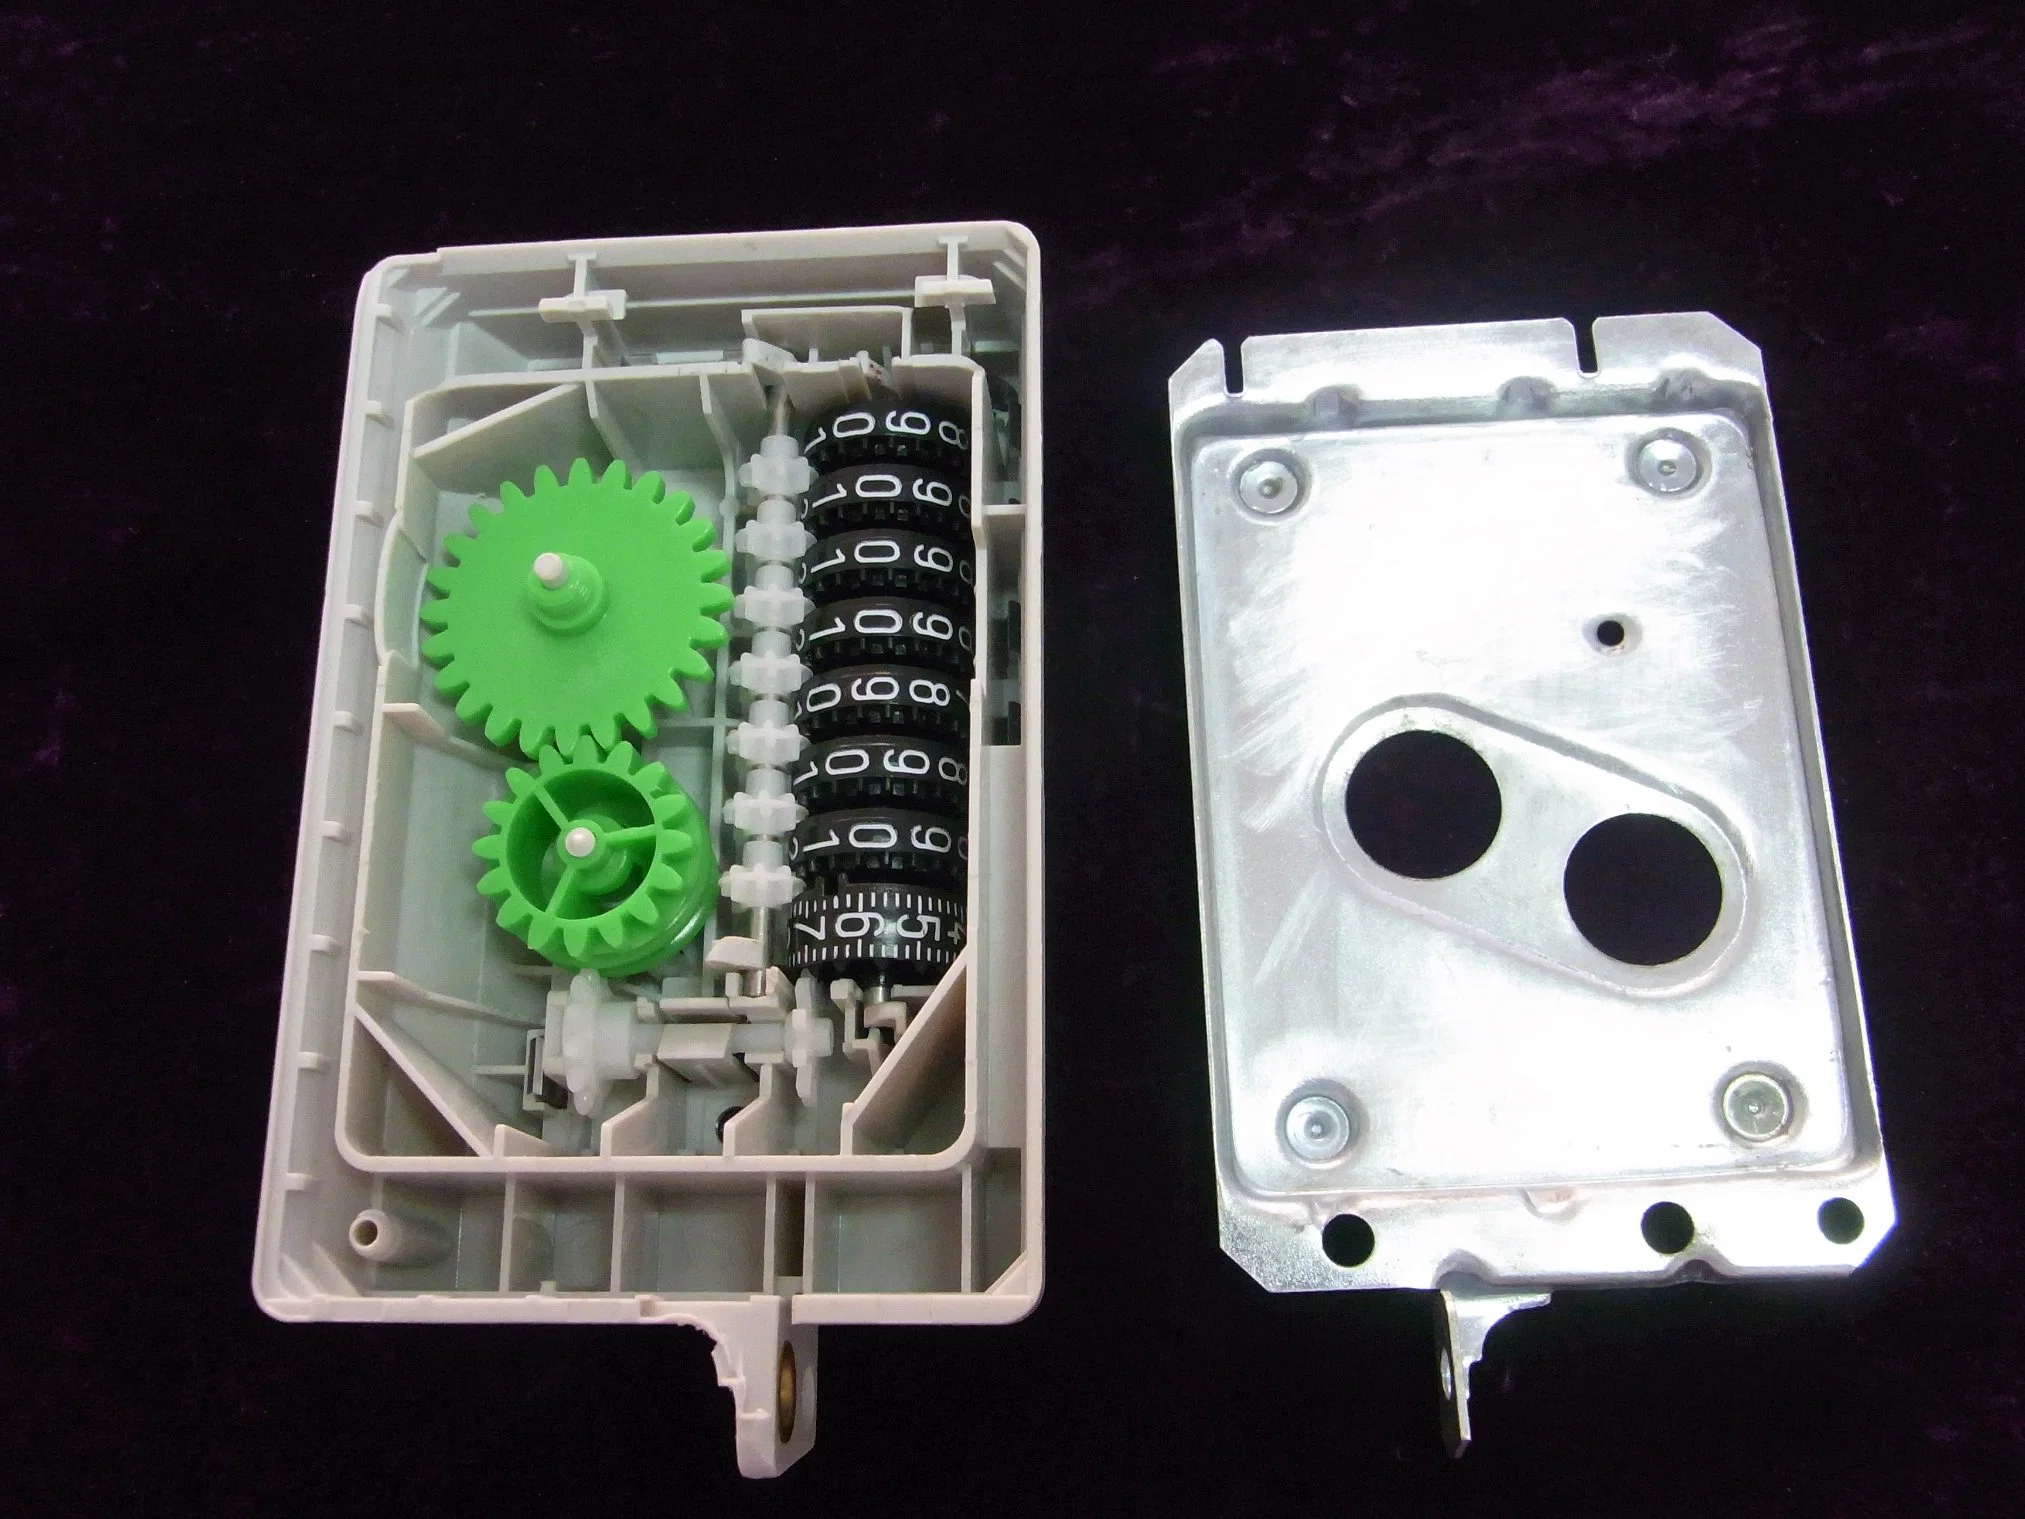 OEM Electronic Manufacturing Services, PCBA Box Build in Plastic / Metal Housing, Electronic Box Builds, Electronic Assembly,